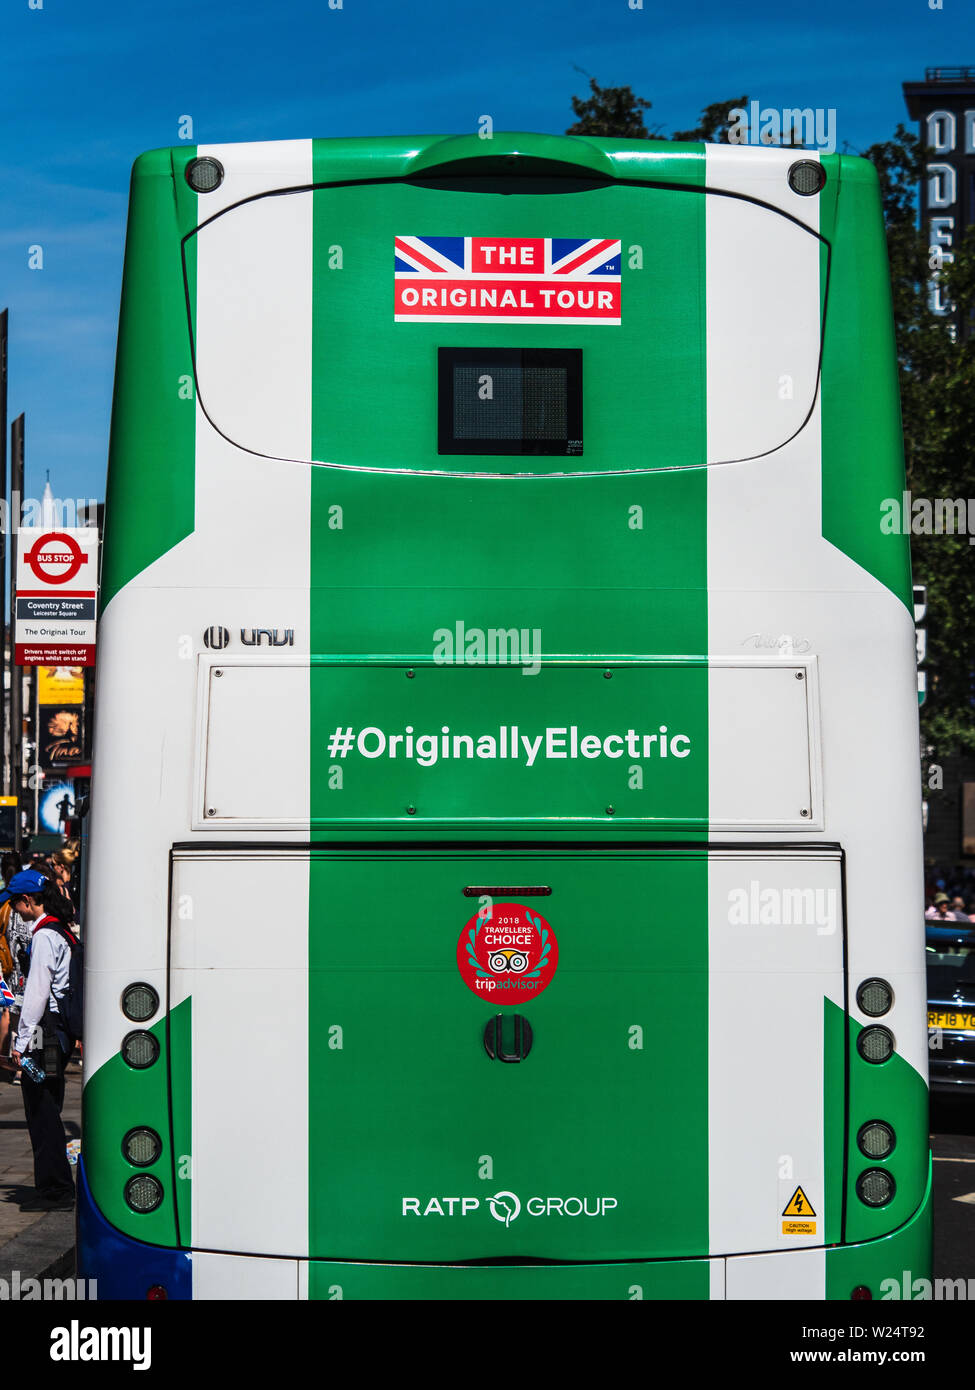 100% Eectric Tourist Bus London - The Original London Tour Electric Eco Tourist Bus - an open top bus powered only by electricity. Stock Photo